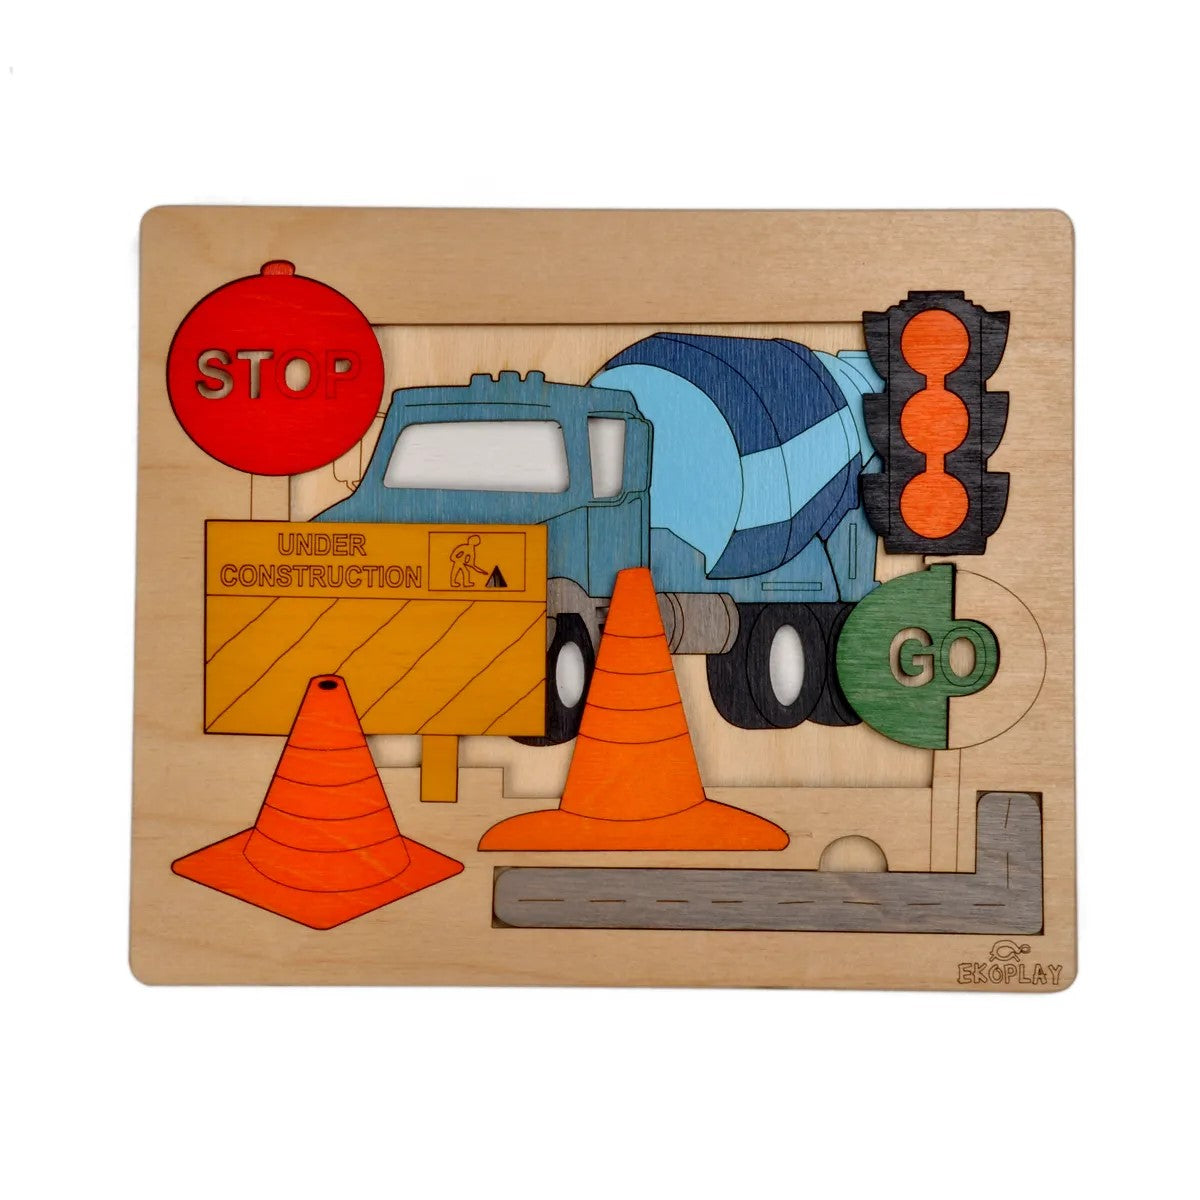 Ekoplay's Road Construction Puzzle